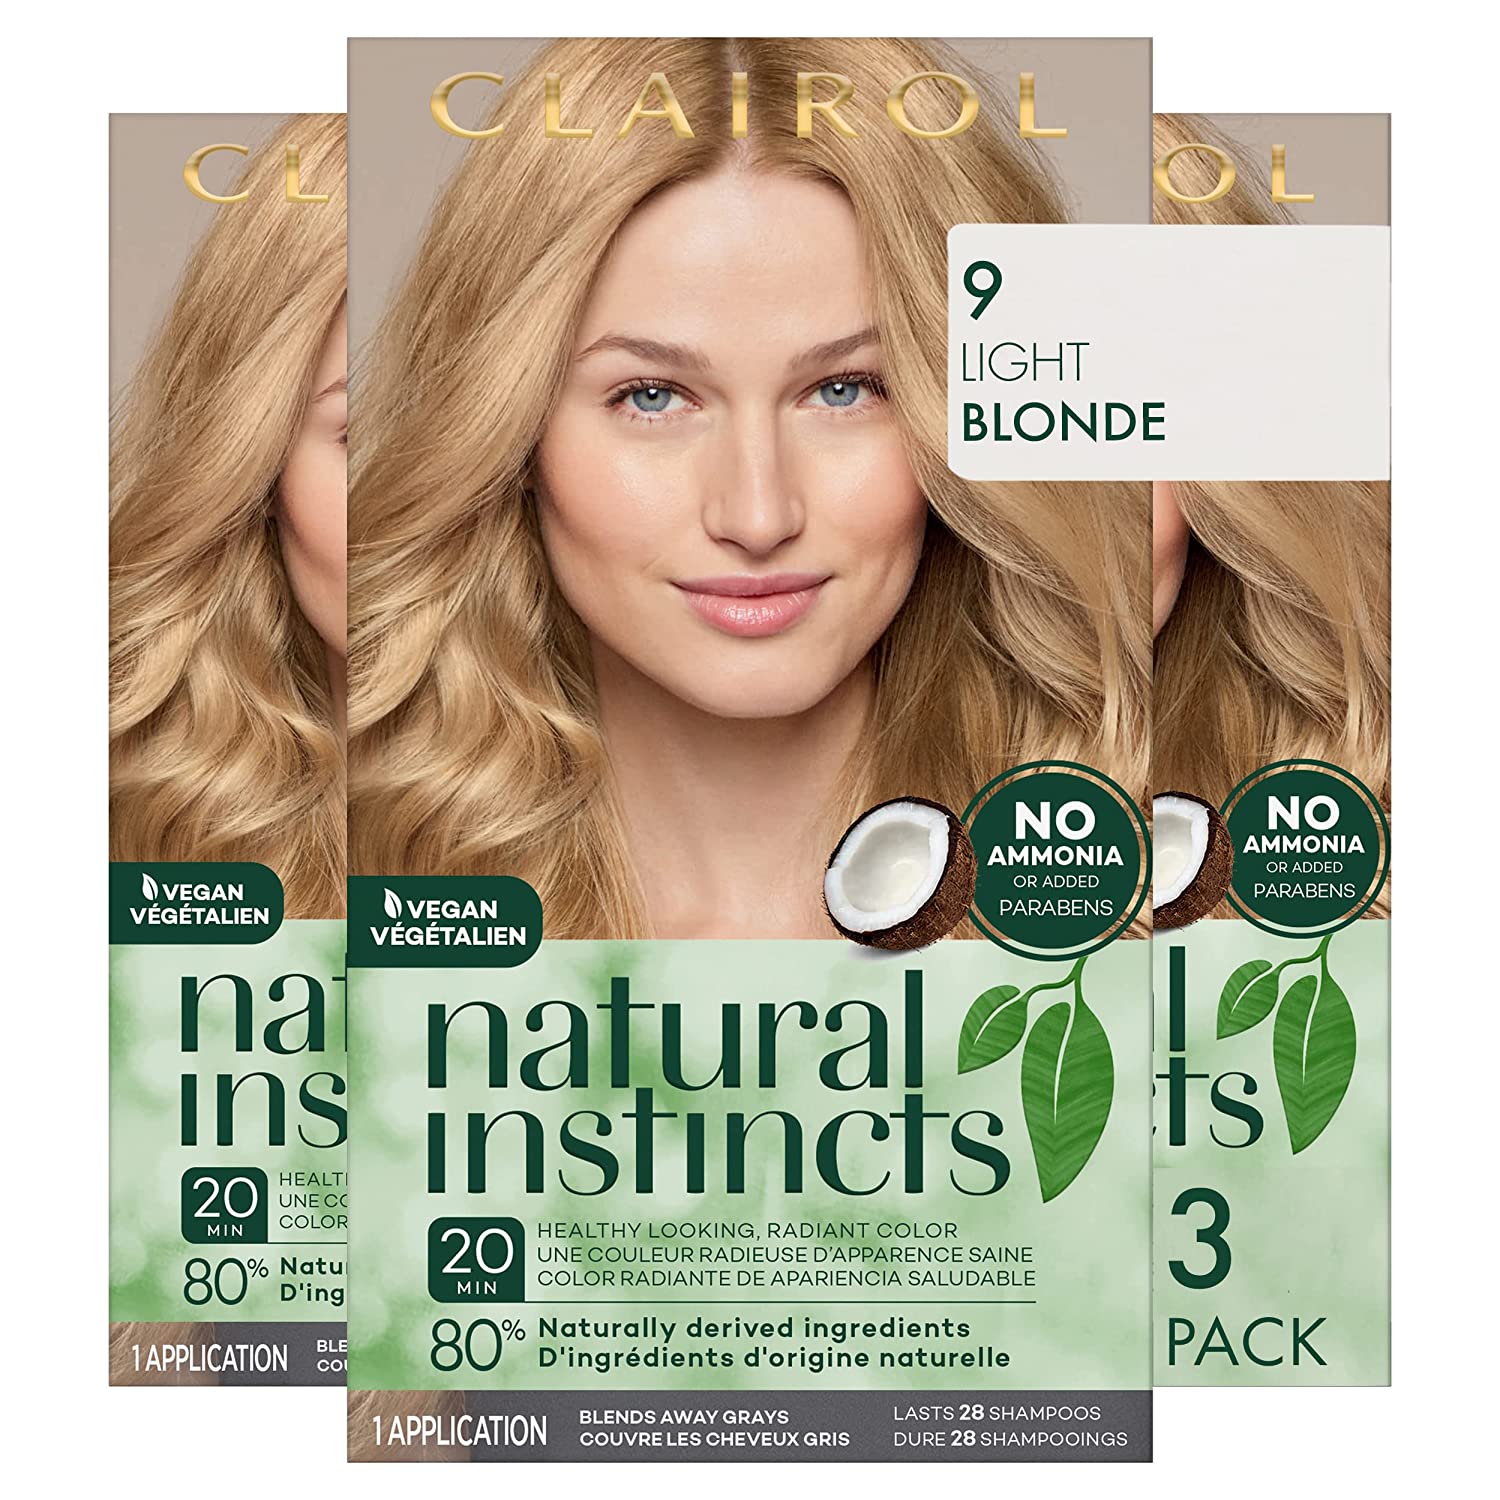  1. Clairol Natural Instincts is the best overall. 